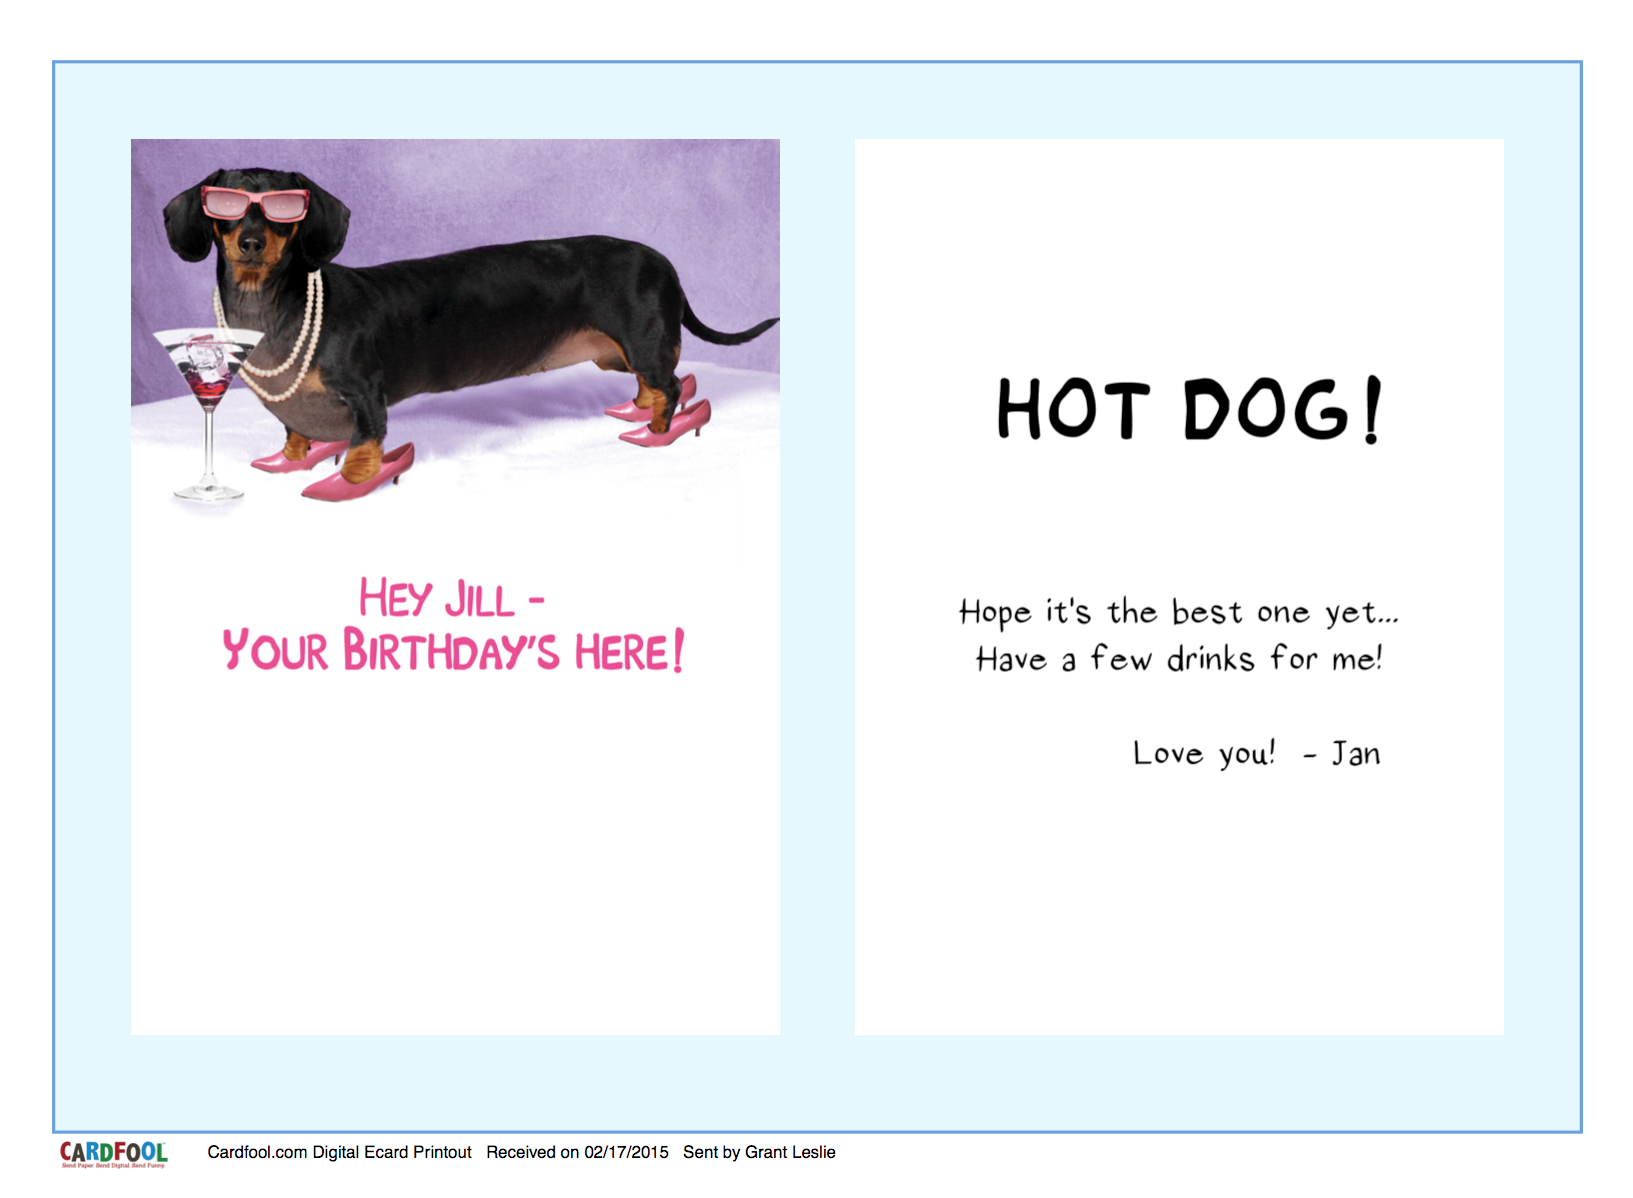 Each Ecard you send includes a Free Exclusive Cardfool Printout for you and your Recipient to share!